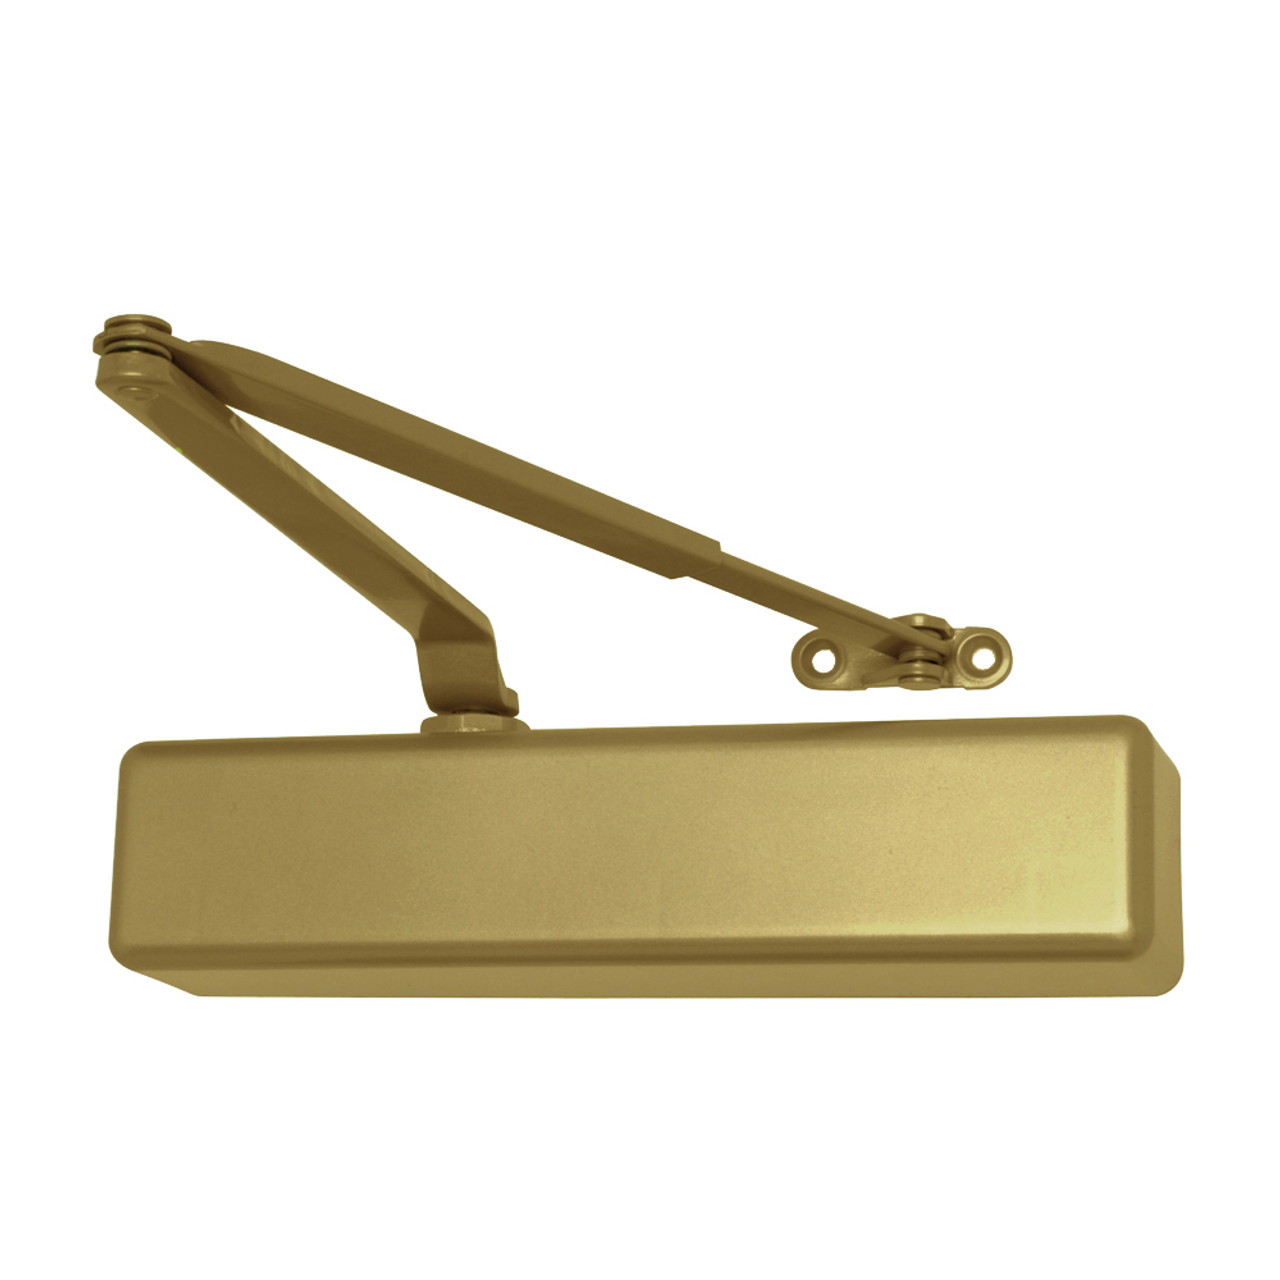 1461-HEDA-w-62G-RH-LTBRZ LCN Door Closer with Hold Open Extra Duty Arm with Thick Hub Shoe in Light Bronze Finish